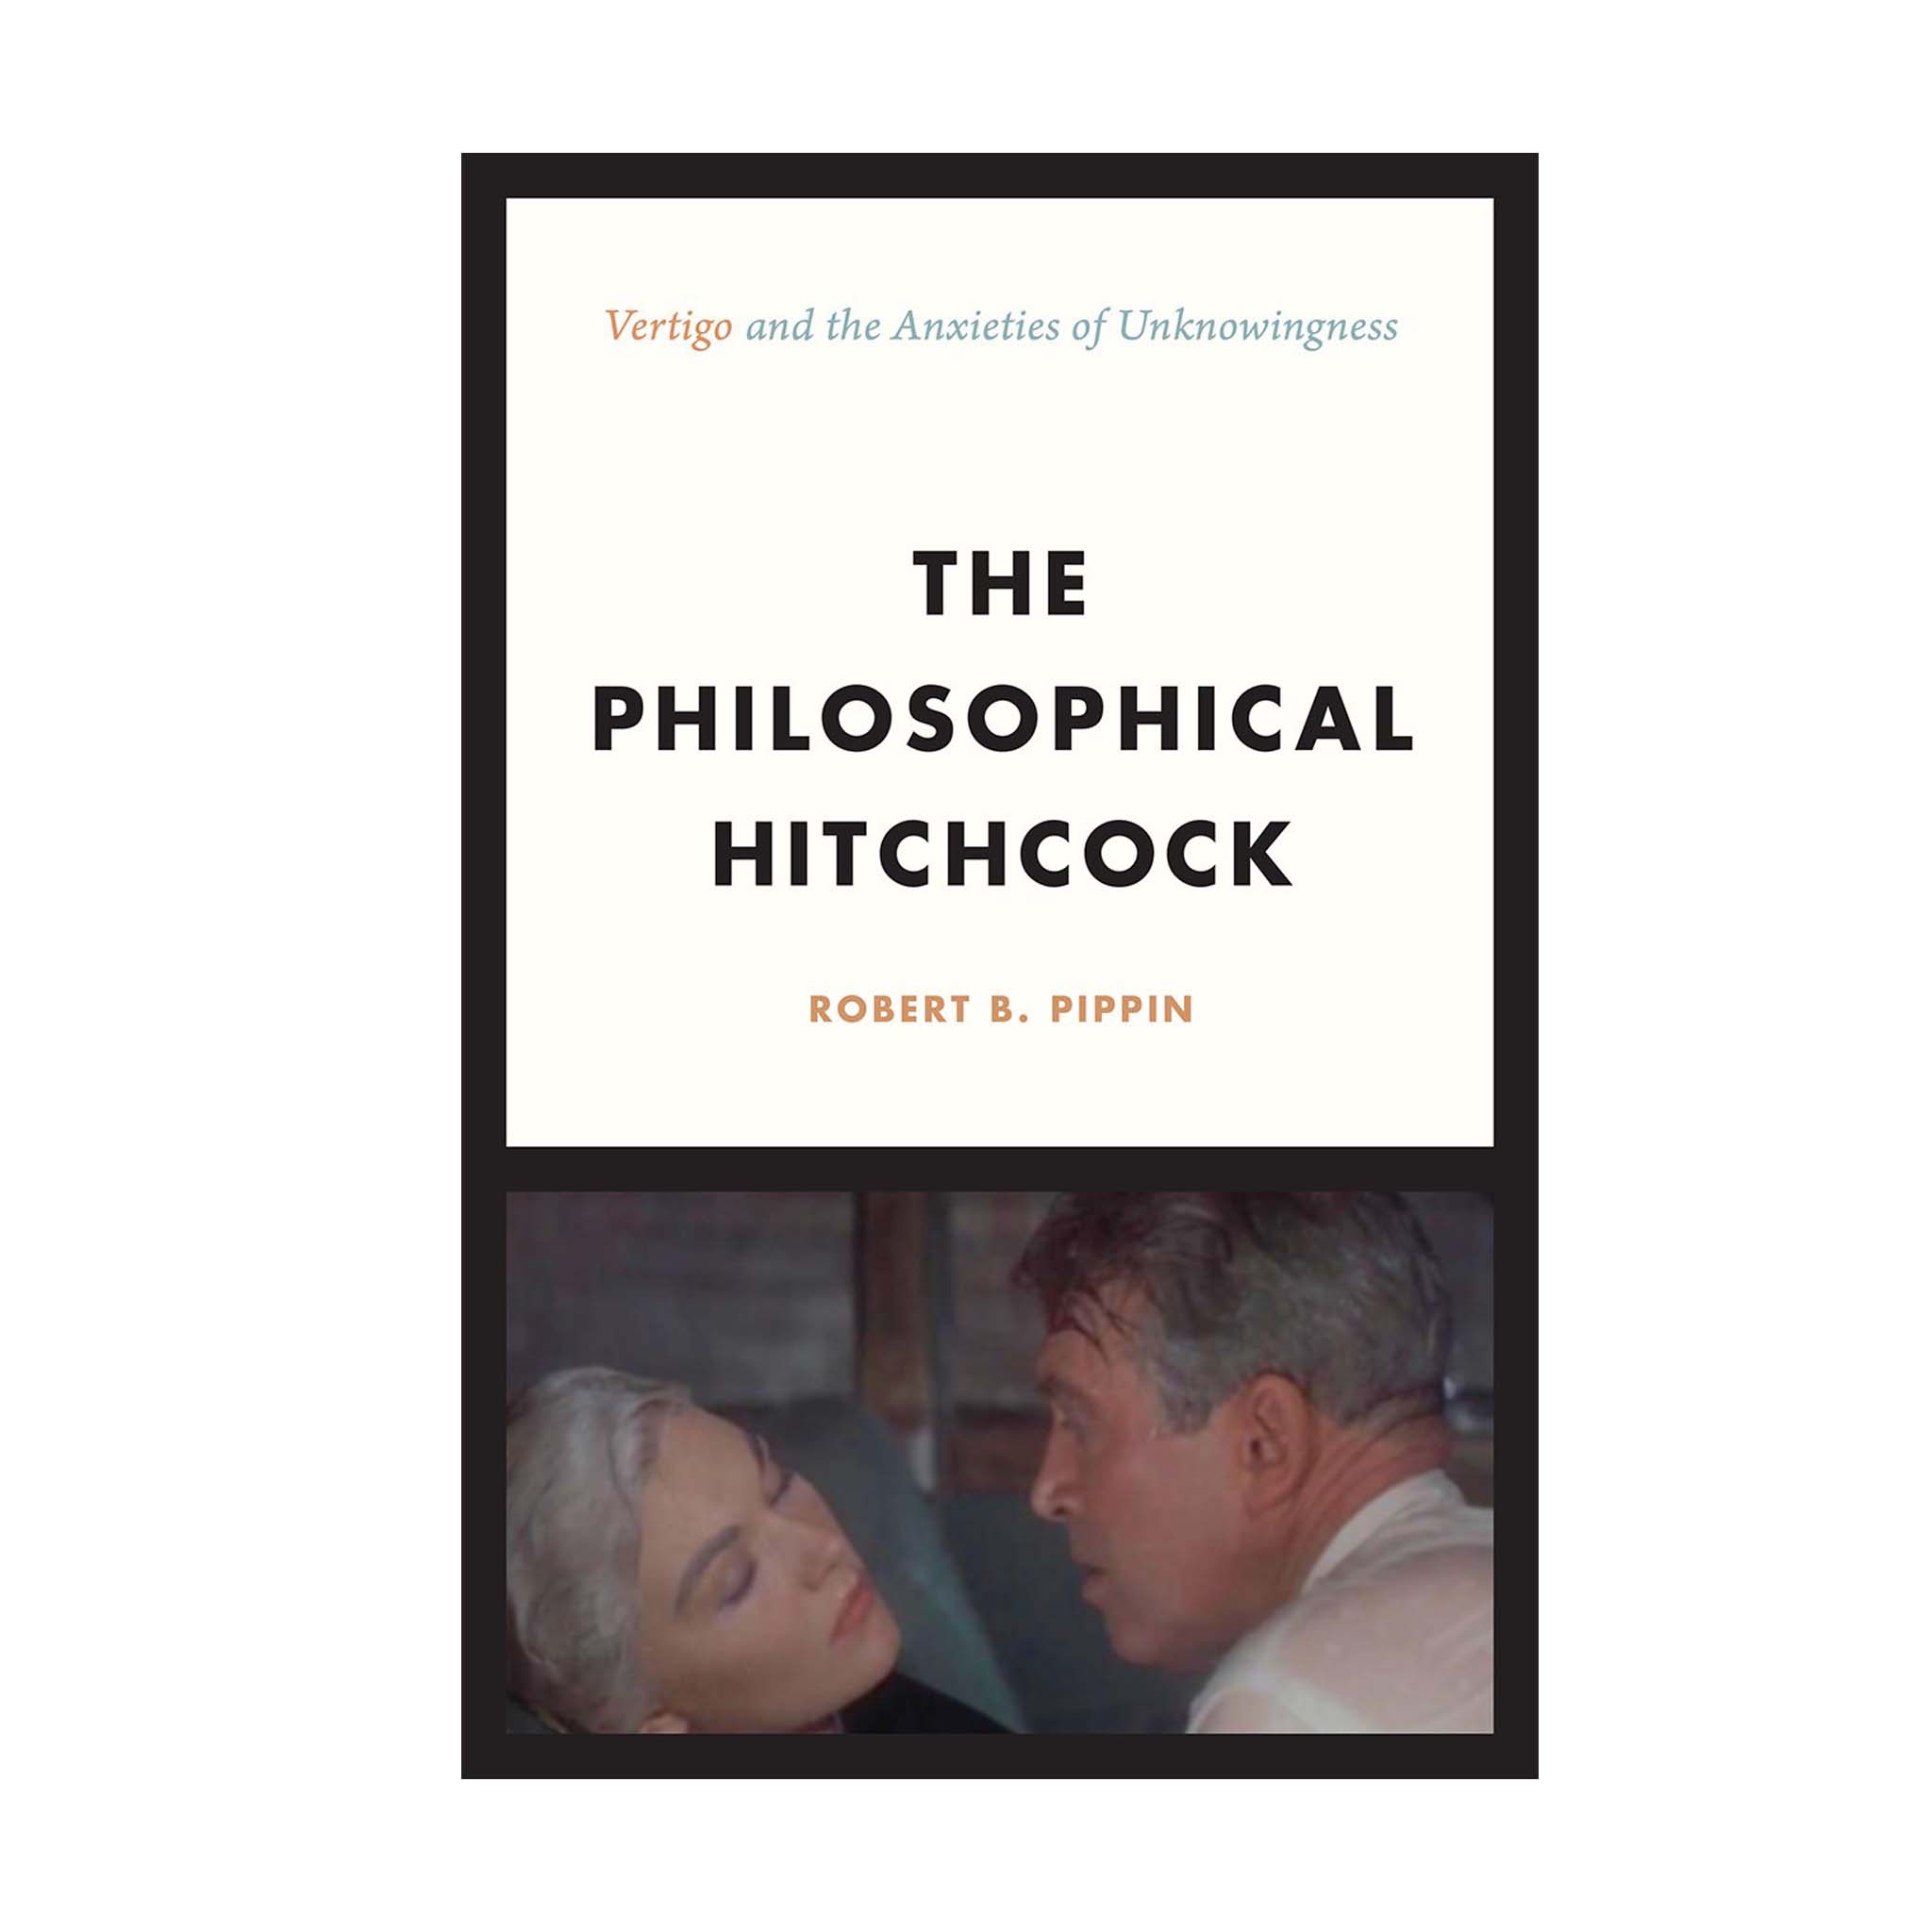 THE PHILOSOPHICAL HITCHCOCK